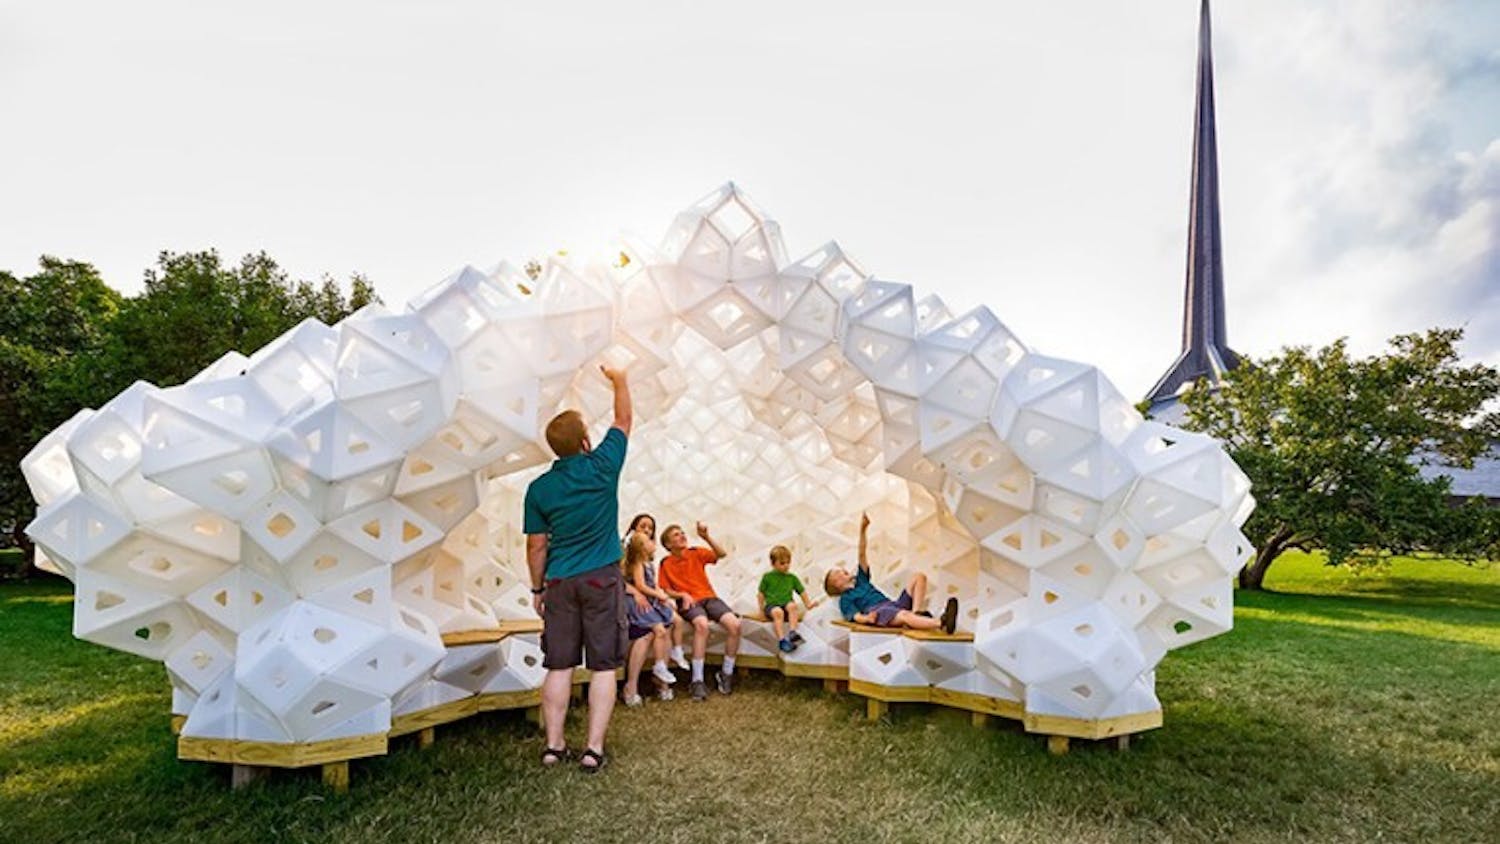 "Synergia", a public architectural pavilion, was designed by IU School of Art and Architecture + Design students in 2017. "Synergia" will be coming to IU over spring break.